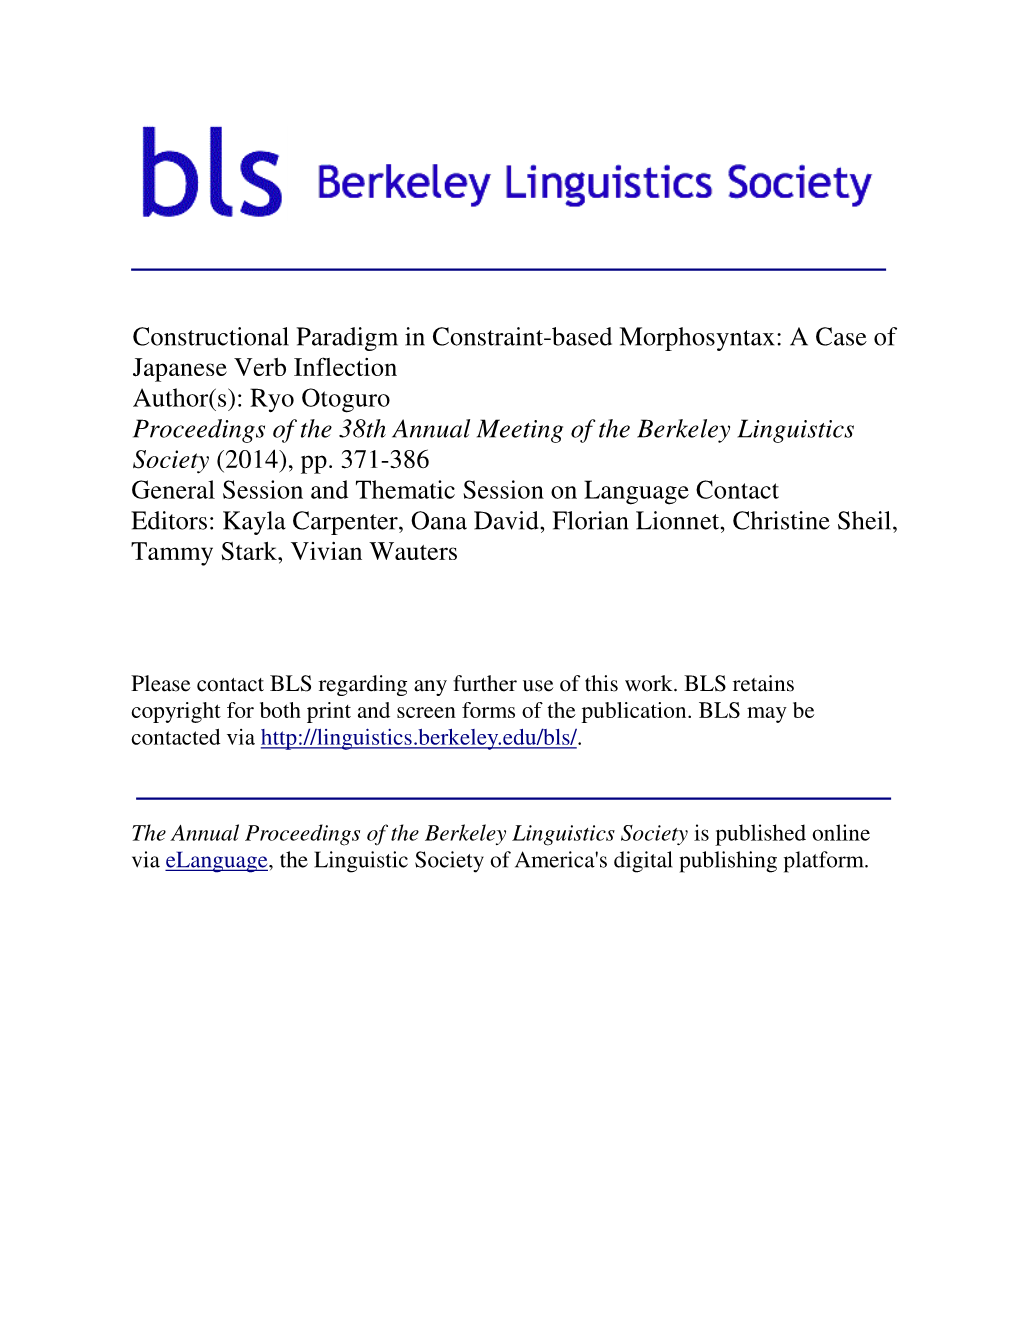 A Case of Japanese Verb Inflection Author(S): Ryo Otoguro Proceedings of the 38Th Annual Meeting of the Berkeley Linguistics Society (2014), Pp